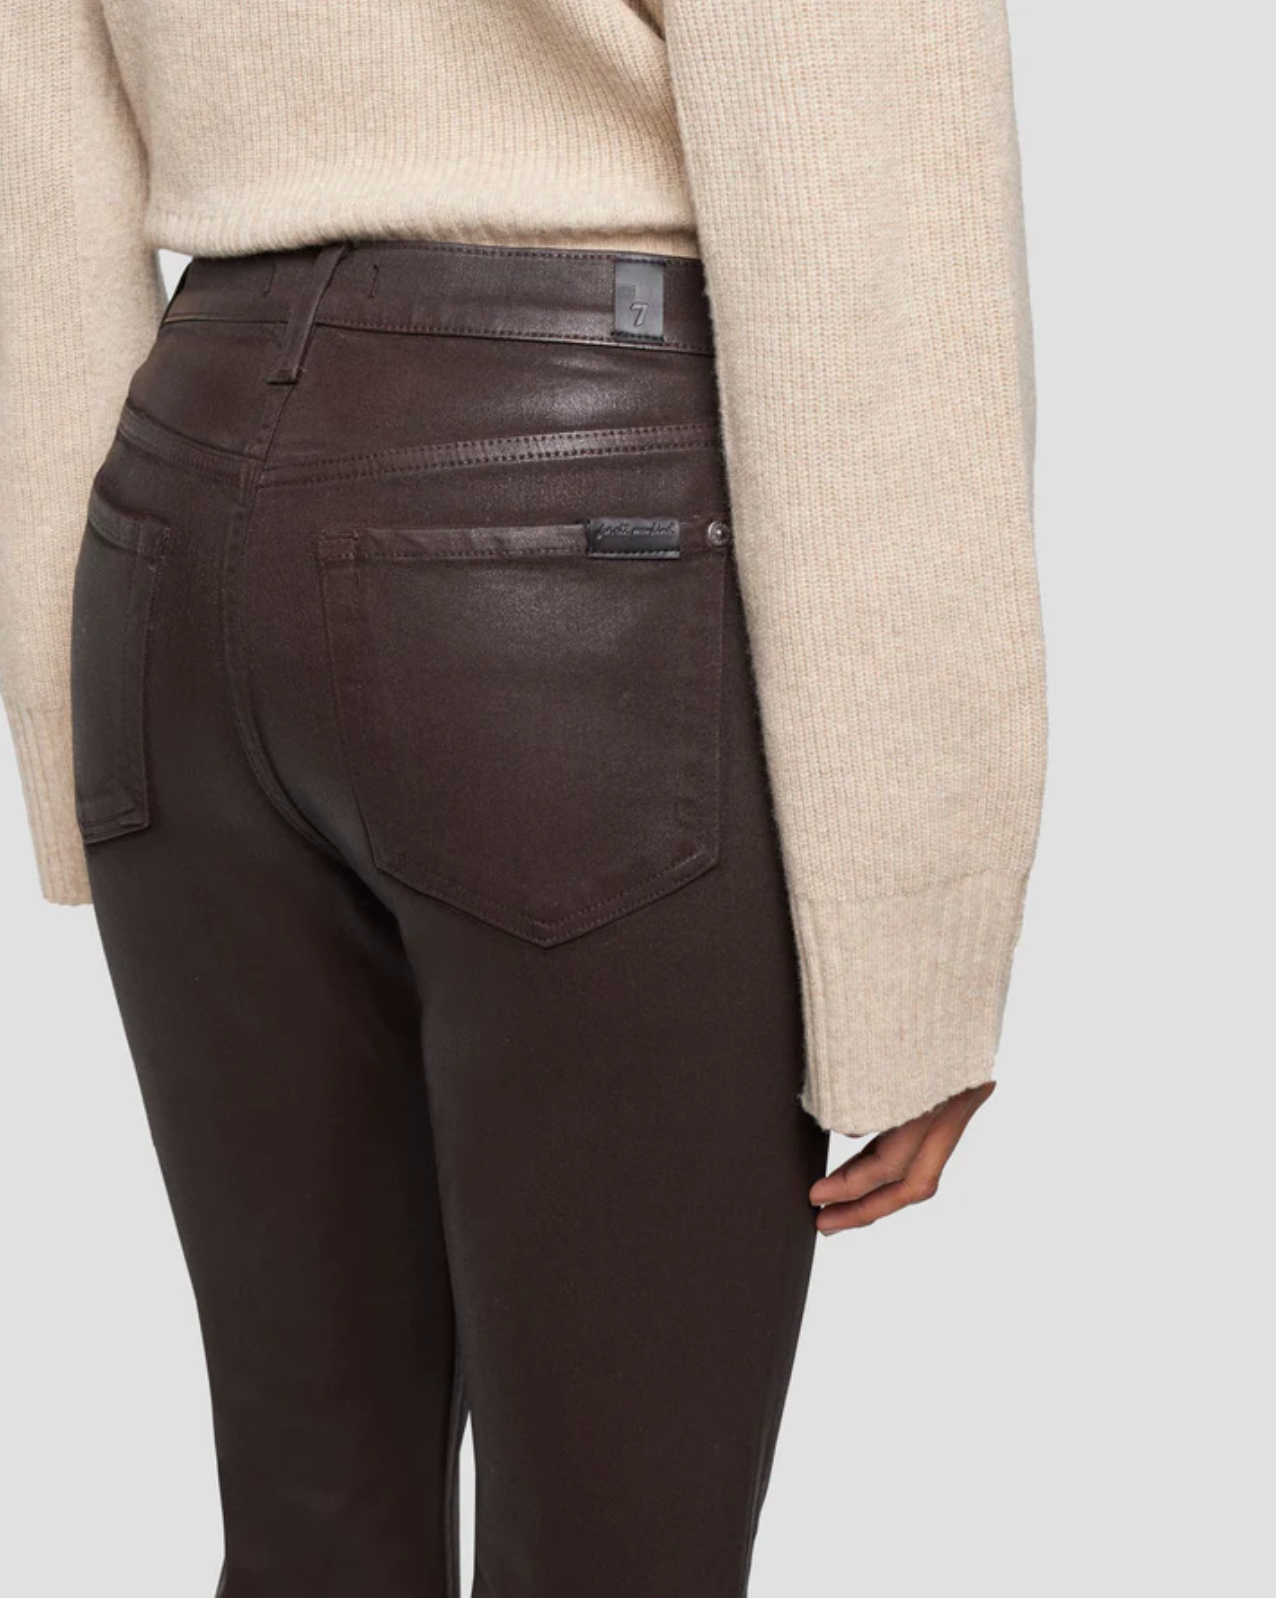 rear pocket close up view of 7 for all mankind&#39;s high waist slim kick coated pant in chocolate brown